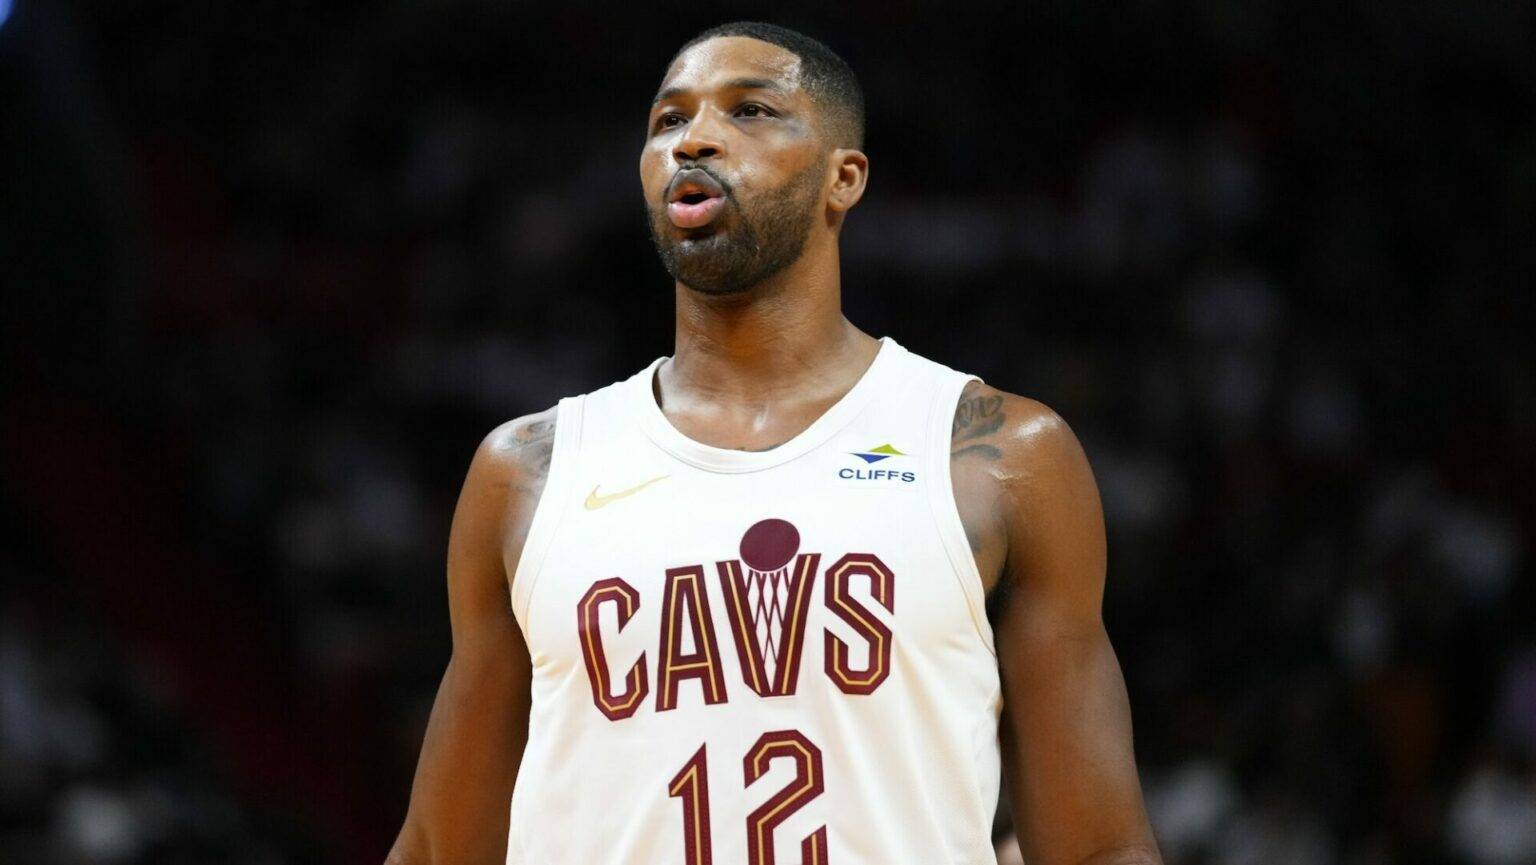 Why Is Tristan Thompson Suspended? NBA Player Suspended Over Use Of